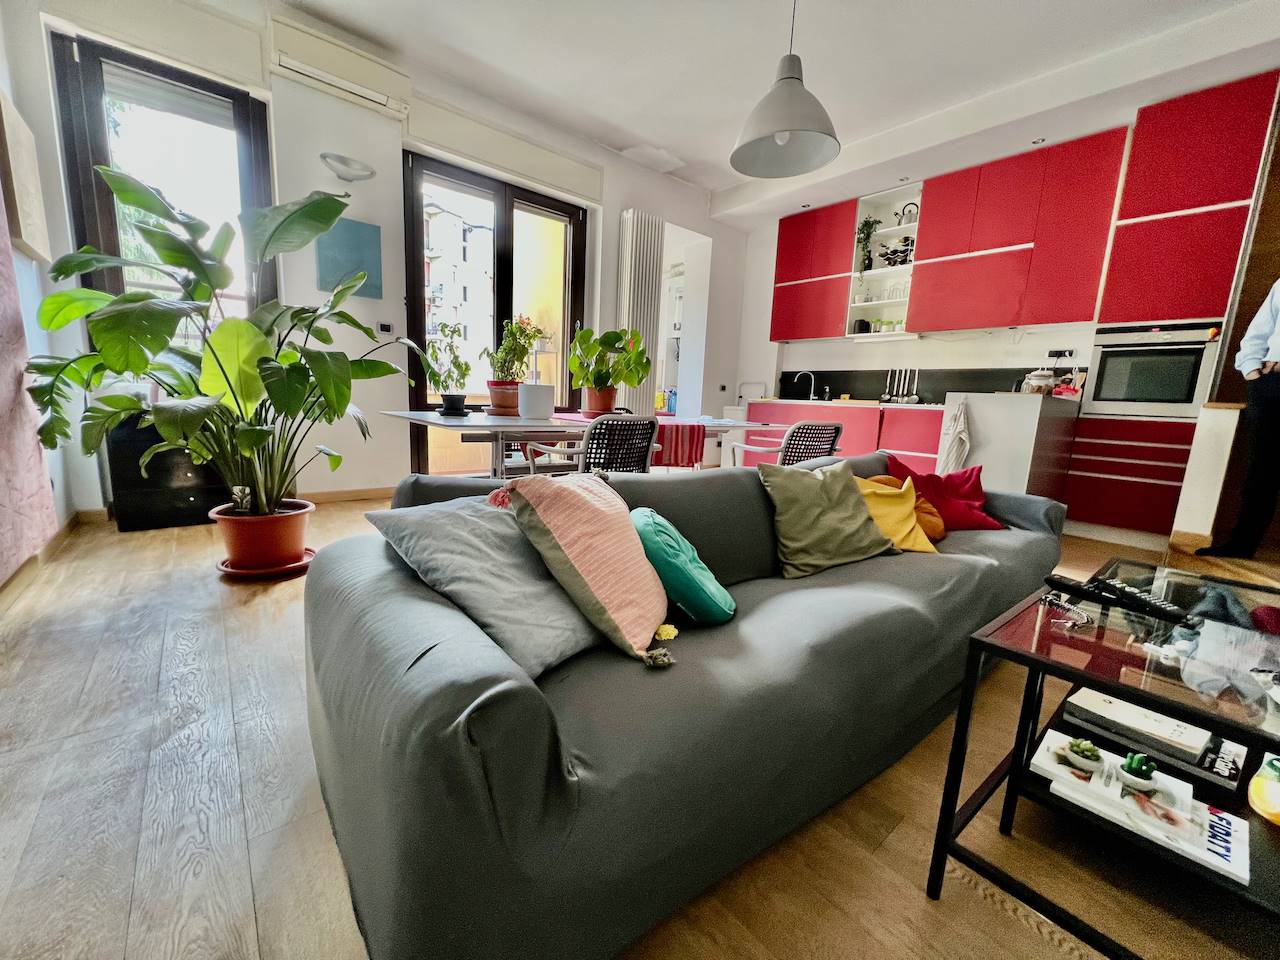 WASHINGTON, MILANO, Apartment for sale of 105 Sq. mt., Excellent Condition, Heating Individual heating system, Energetic class: G, Epi: 175 kwh/m2 year, placed at 3° on 4, composed by: 3 Rooms, Show 